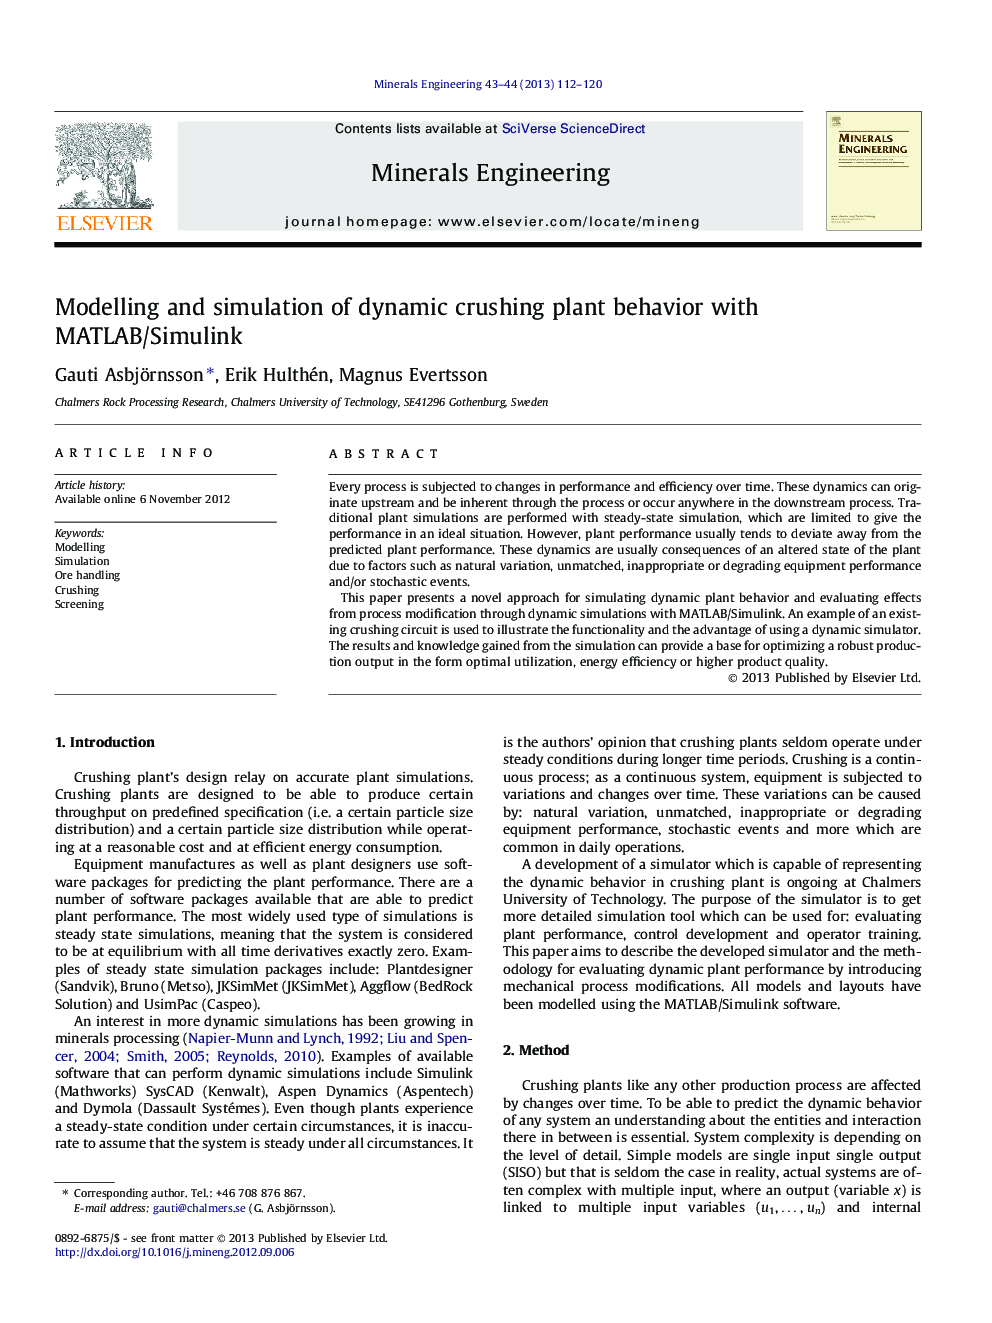 Modelling and simulation of dynamic crushing plant behavior with MATLAB/Simulink